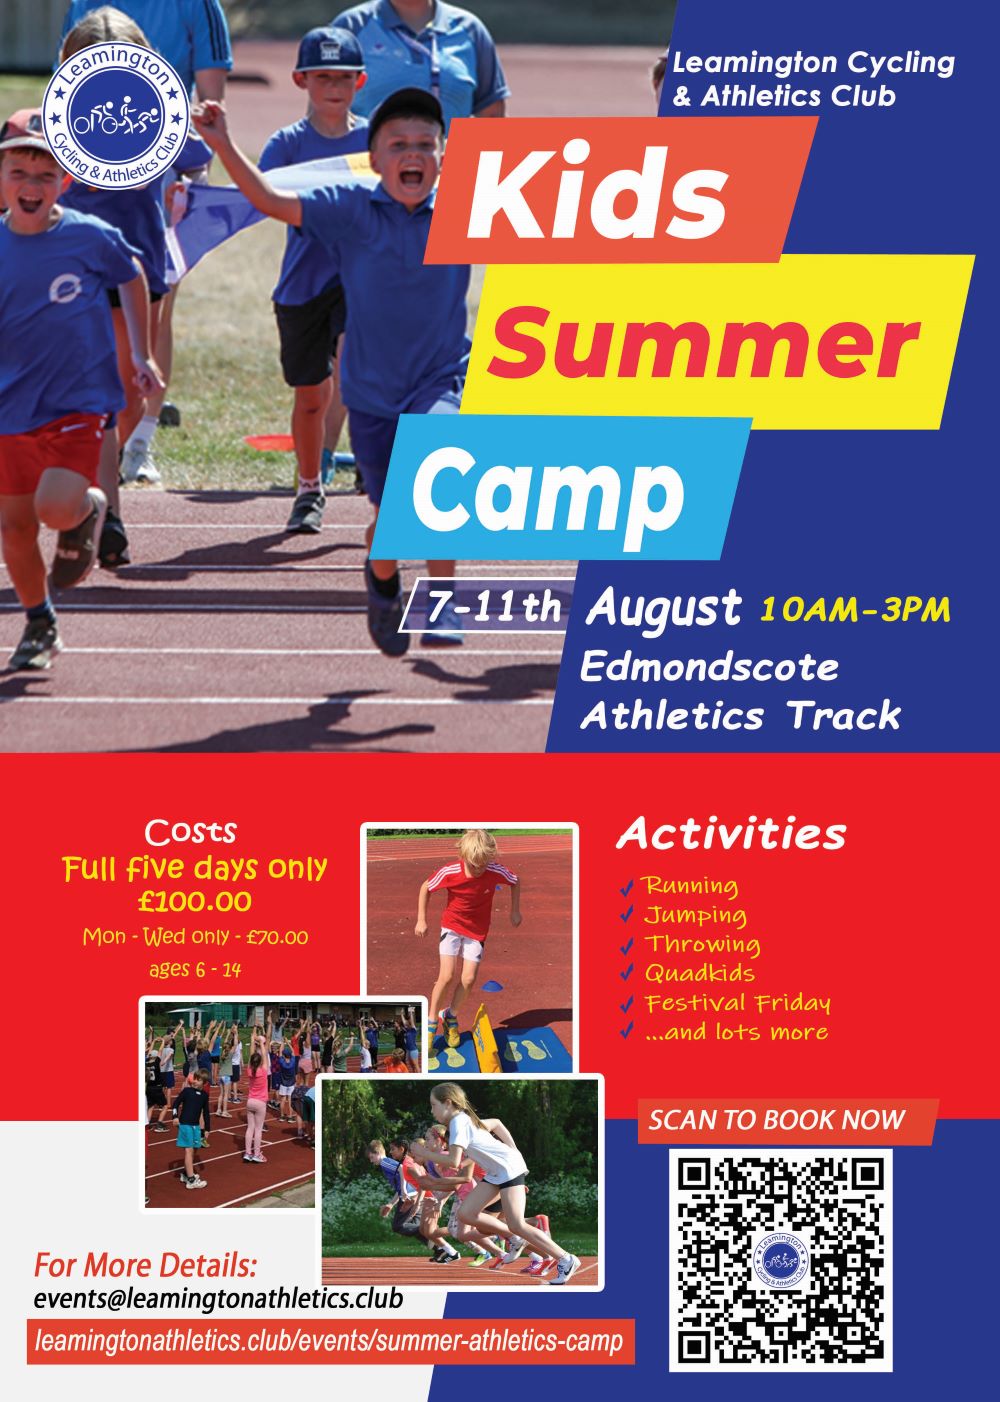 2023 Summer Camp now open to book - Leamington Cycling & Athletics Club